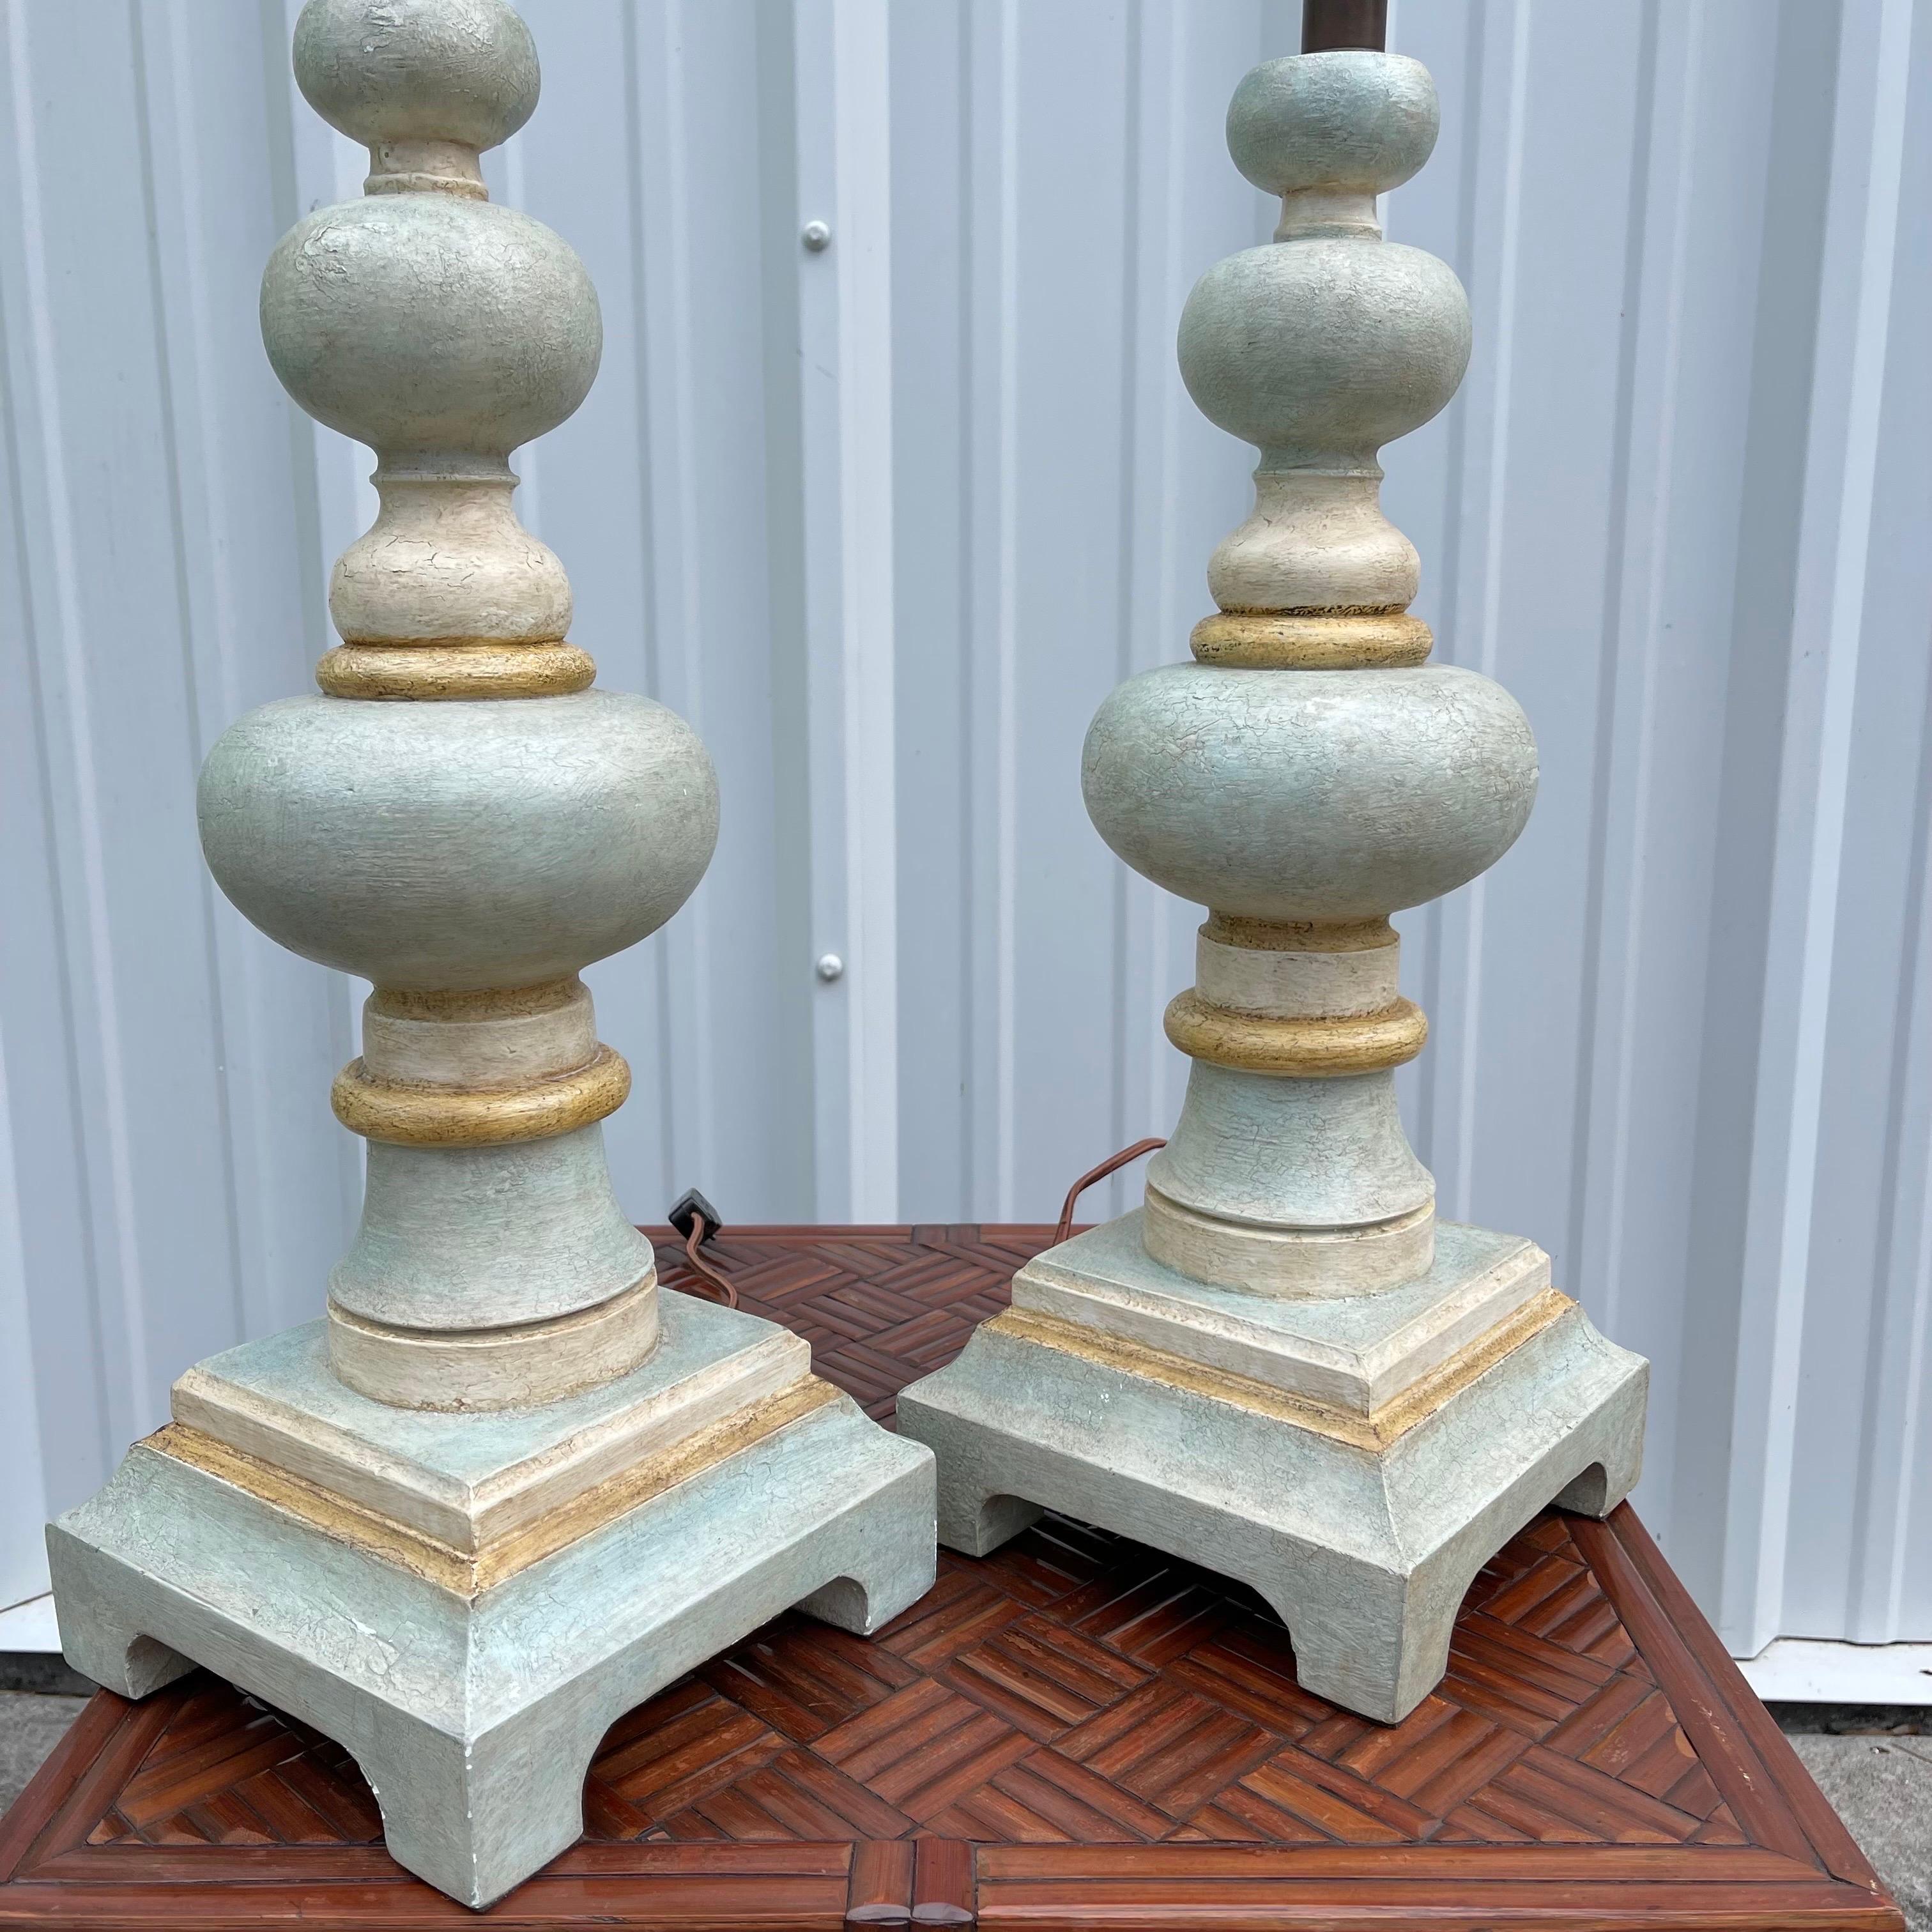 Hollywood Regency Painted Patinated Carved Wood Bobbin Tables Lamps, a Pair For Sale 5